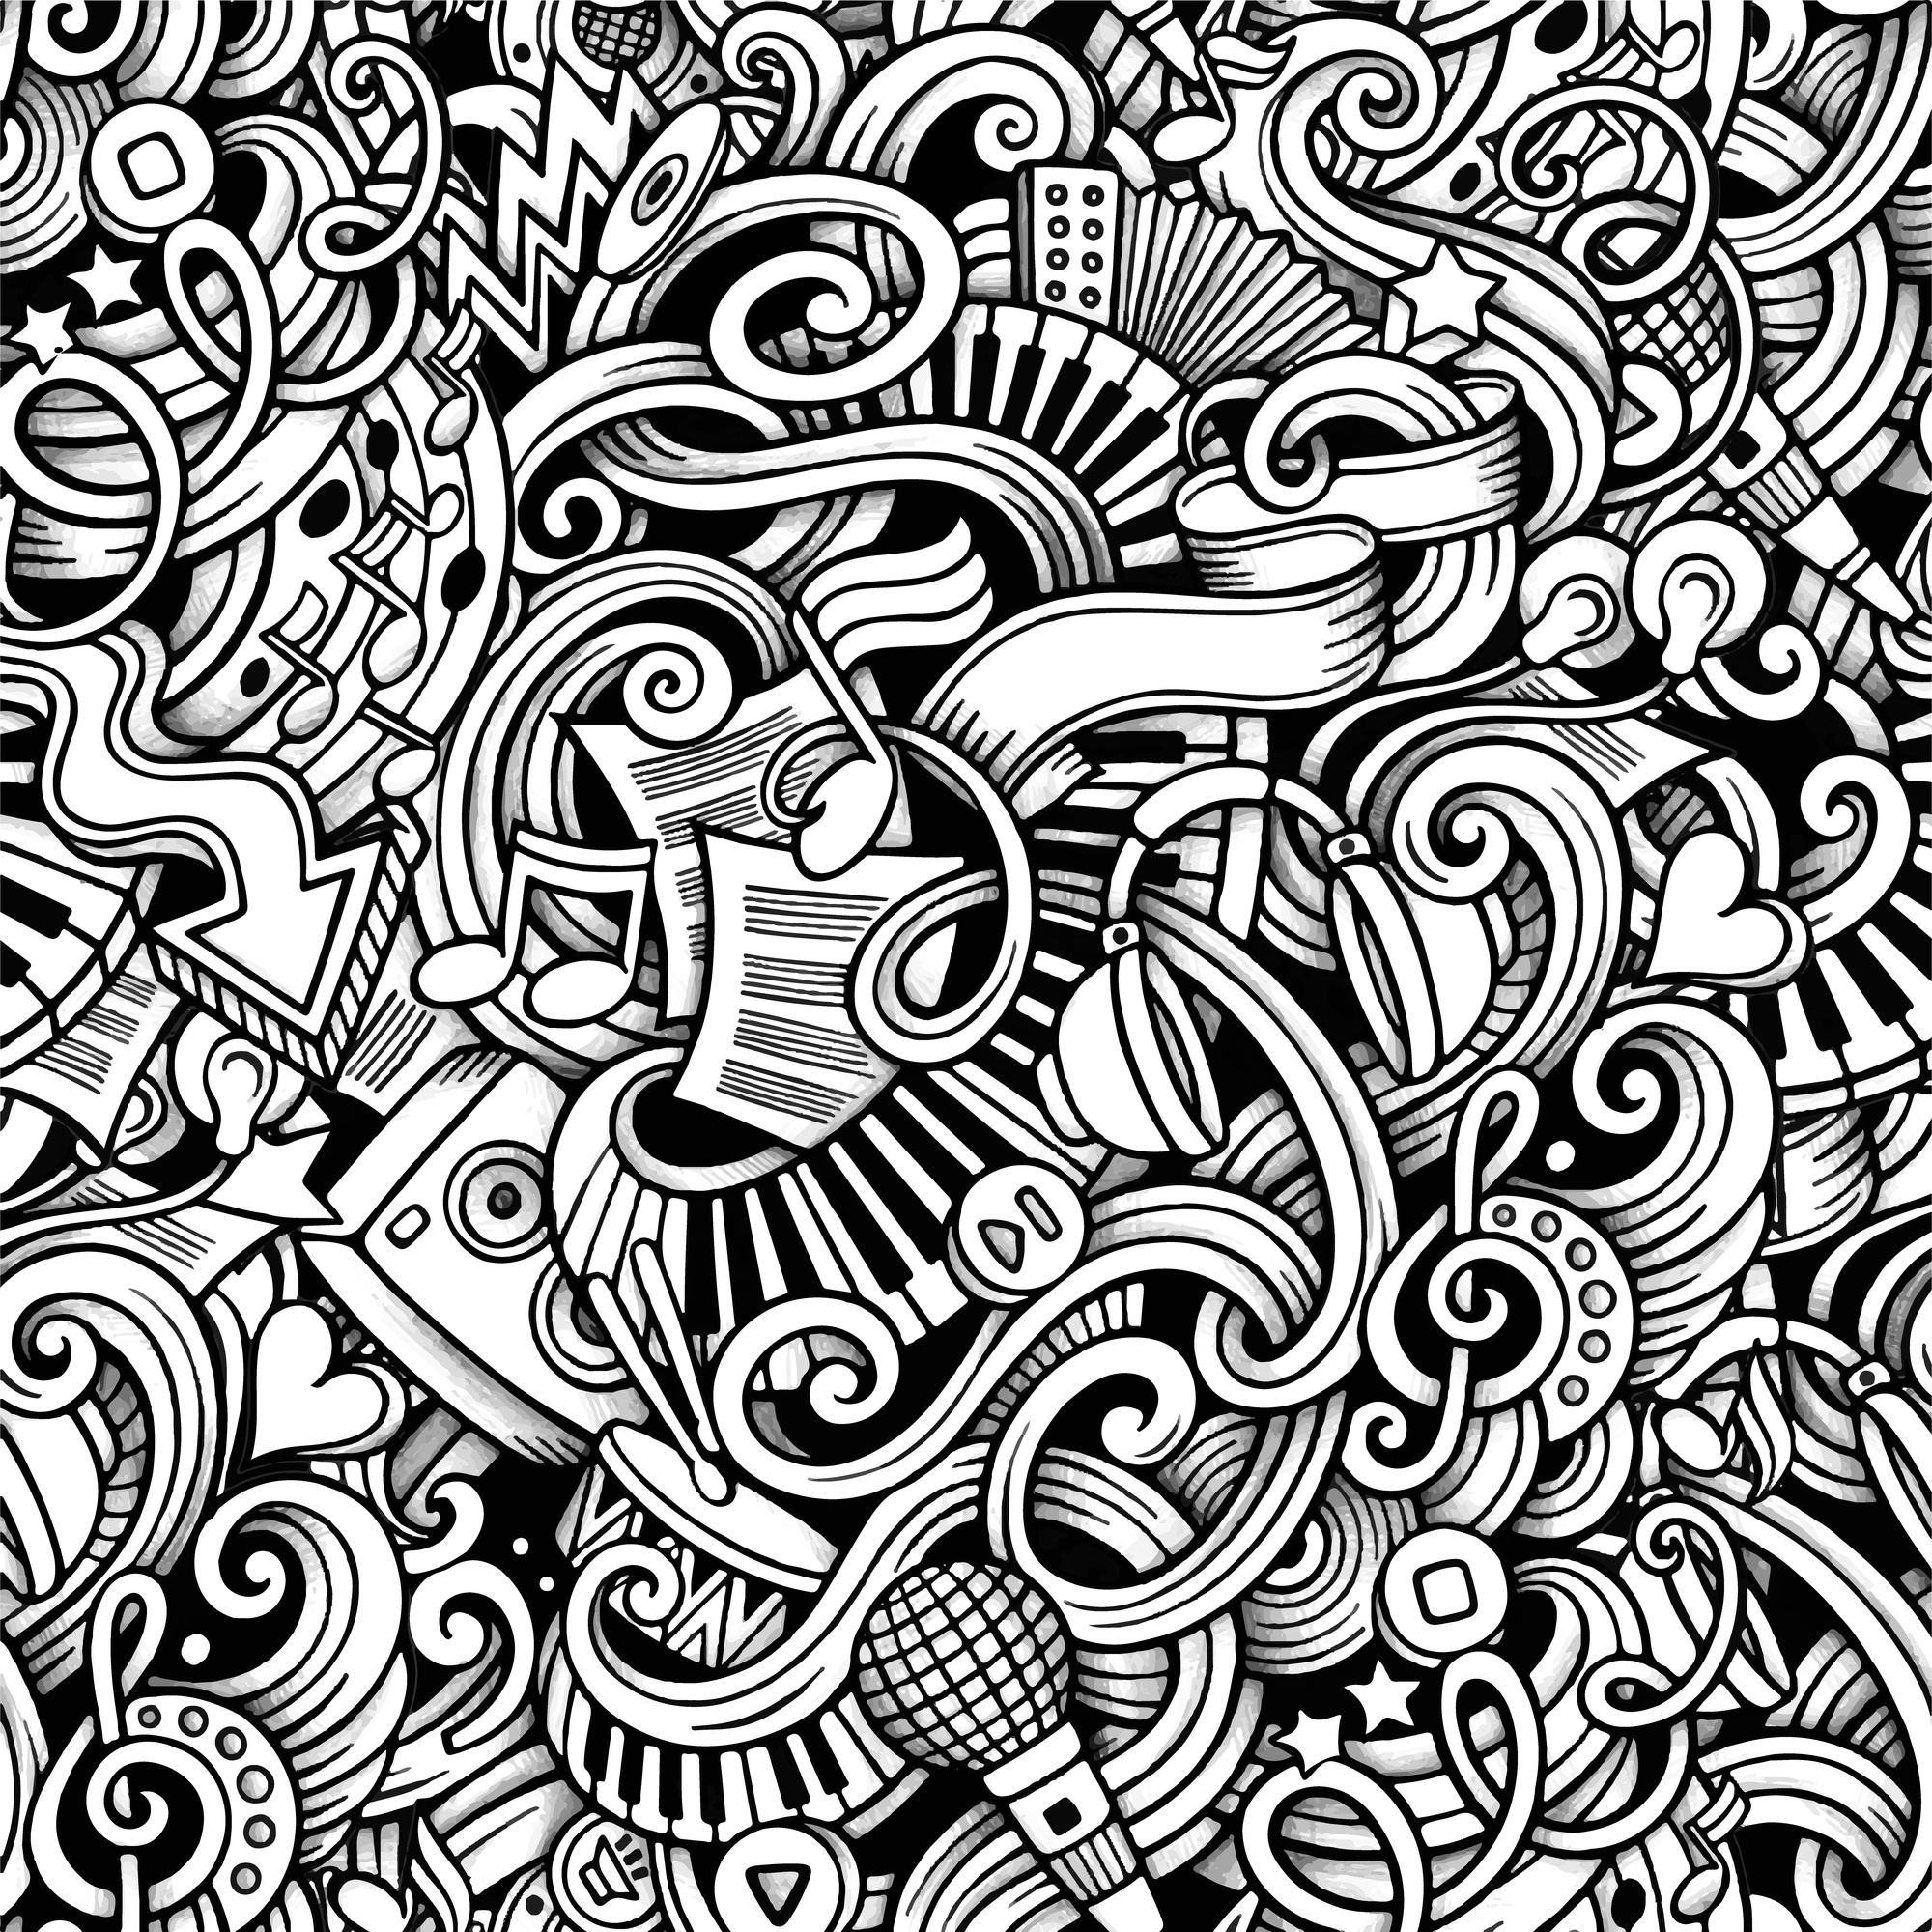 Cartoon hand-drawn doodles on the subject of Music style theme